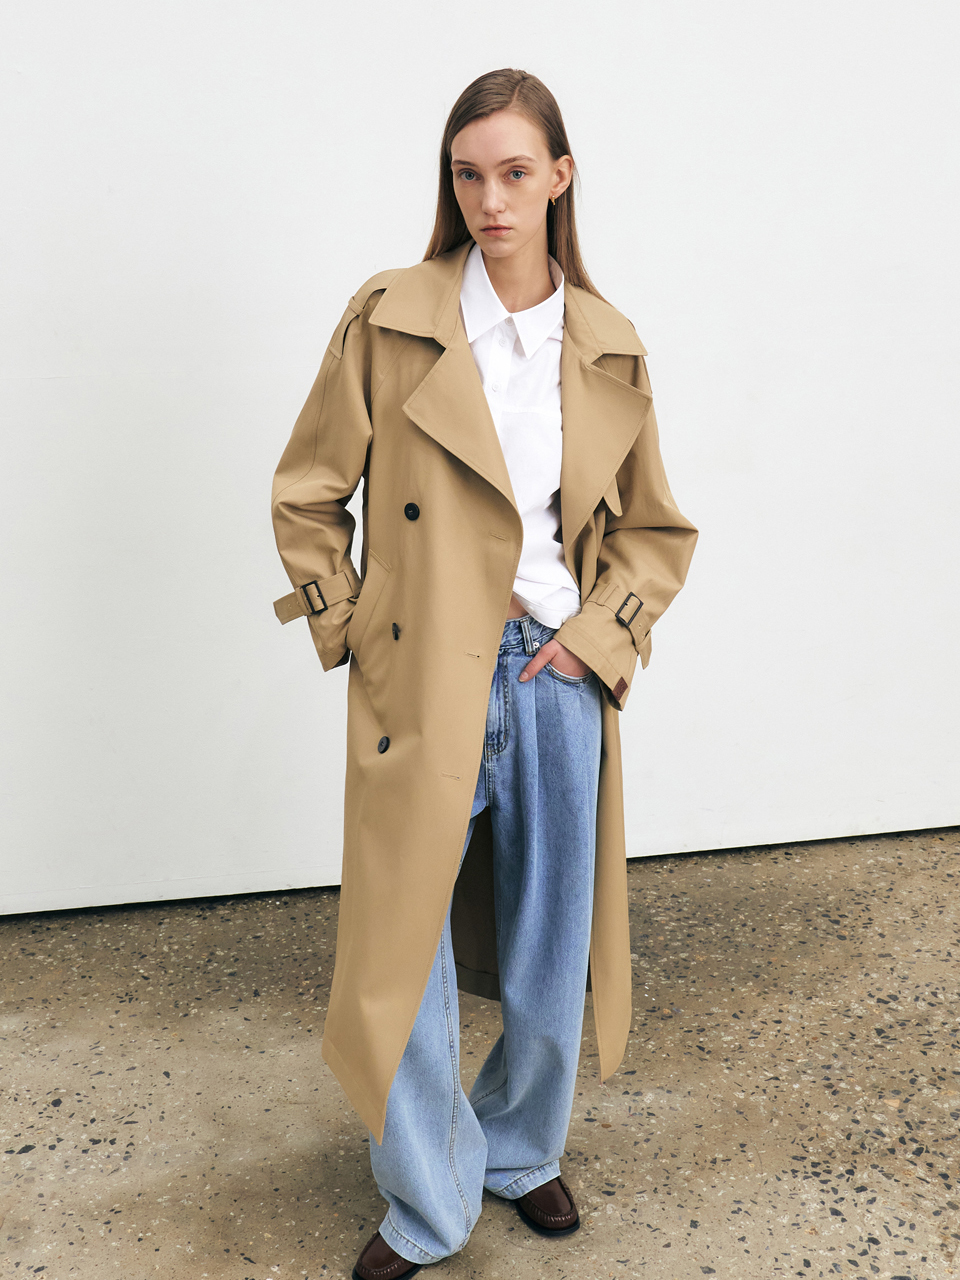 HACIE - [HACIE X ITALY] CLASSIC COTTON OVERSIZE TRENCH COAT [3COLORS]